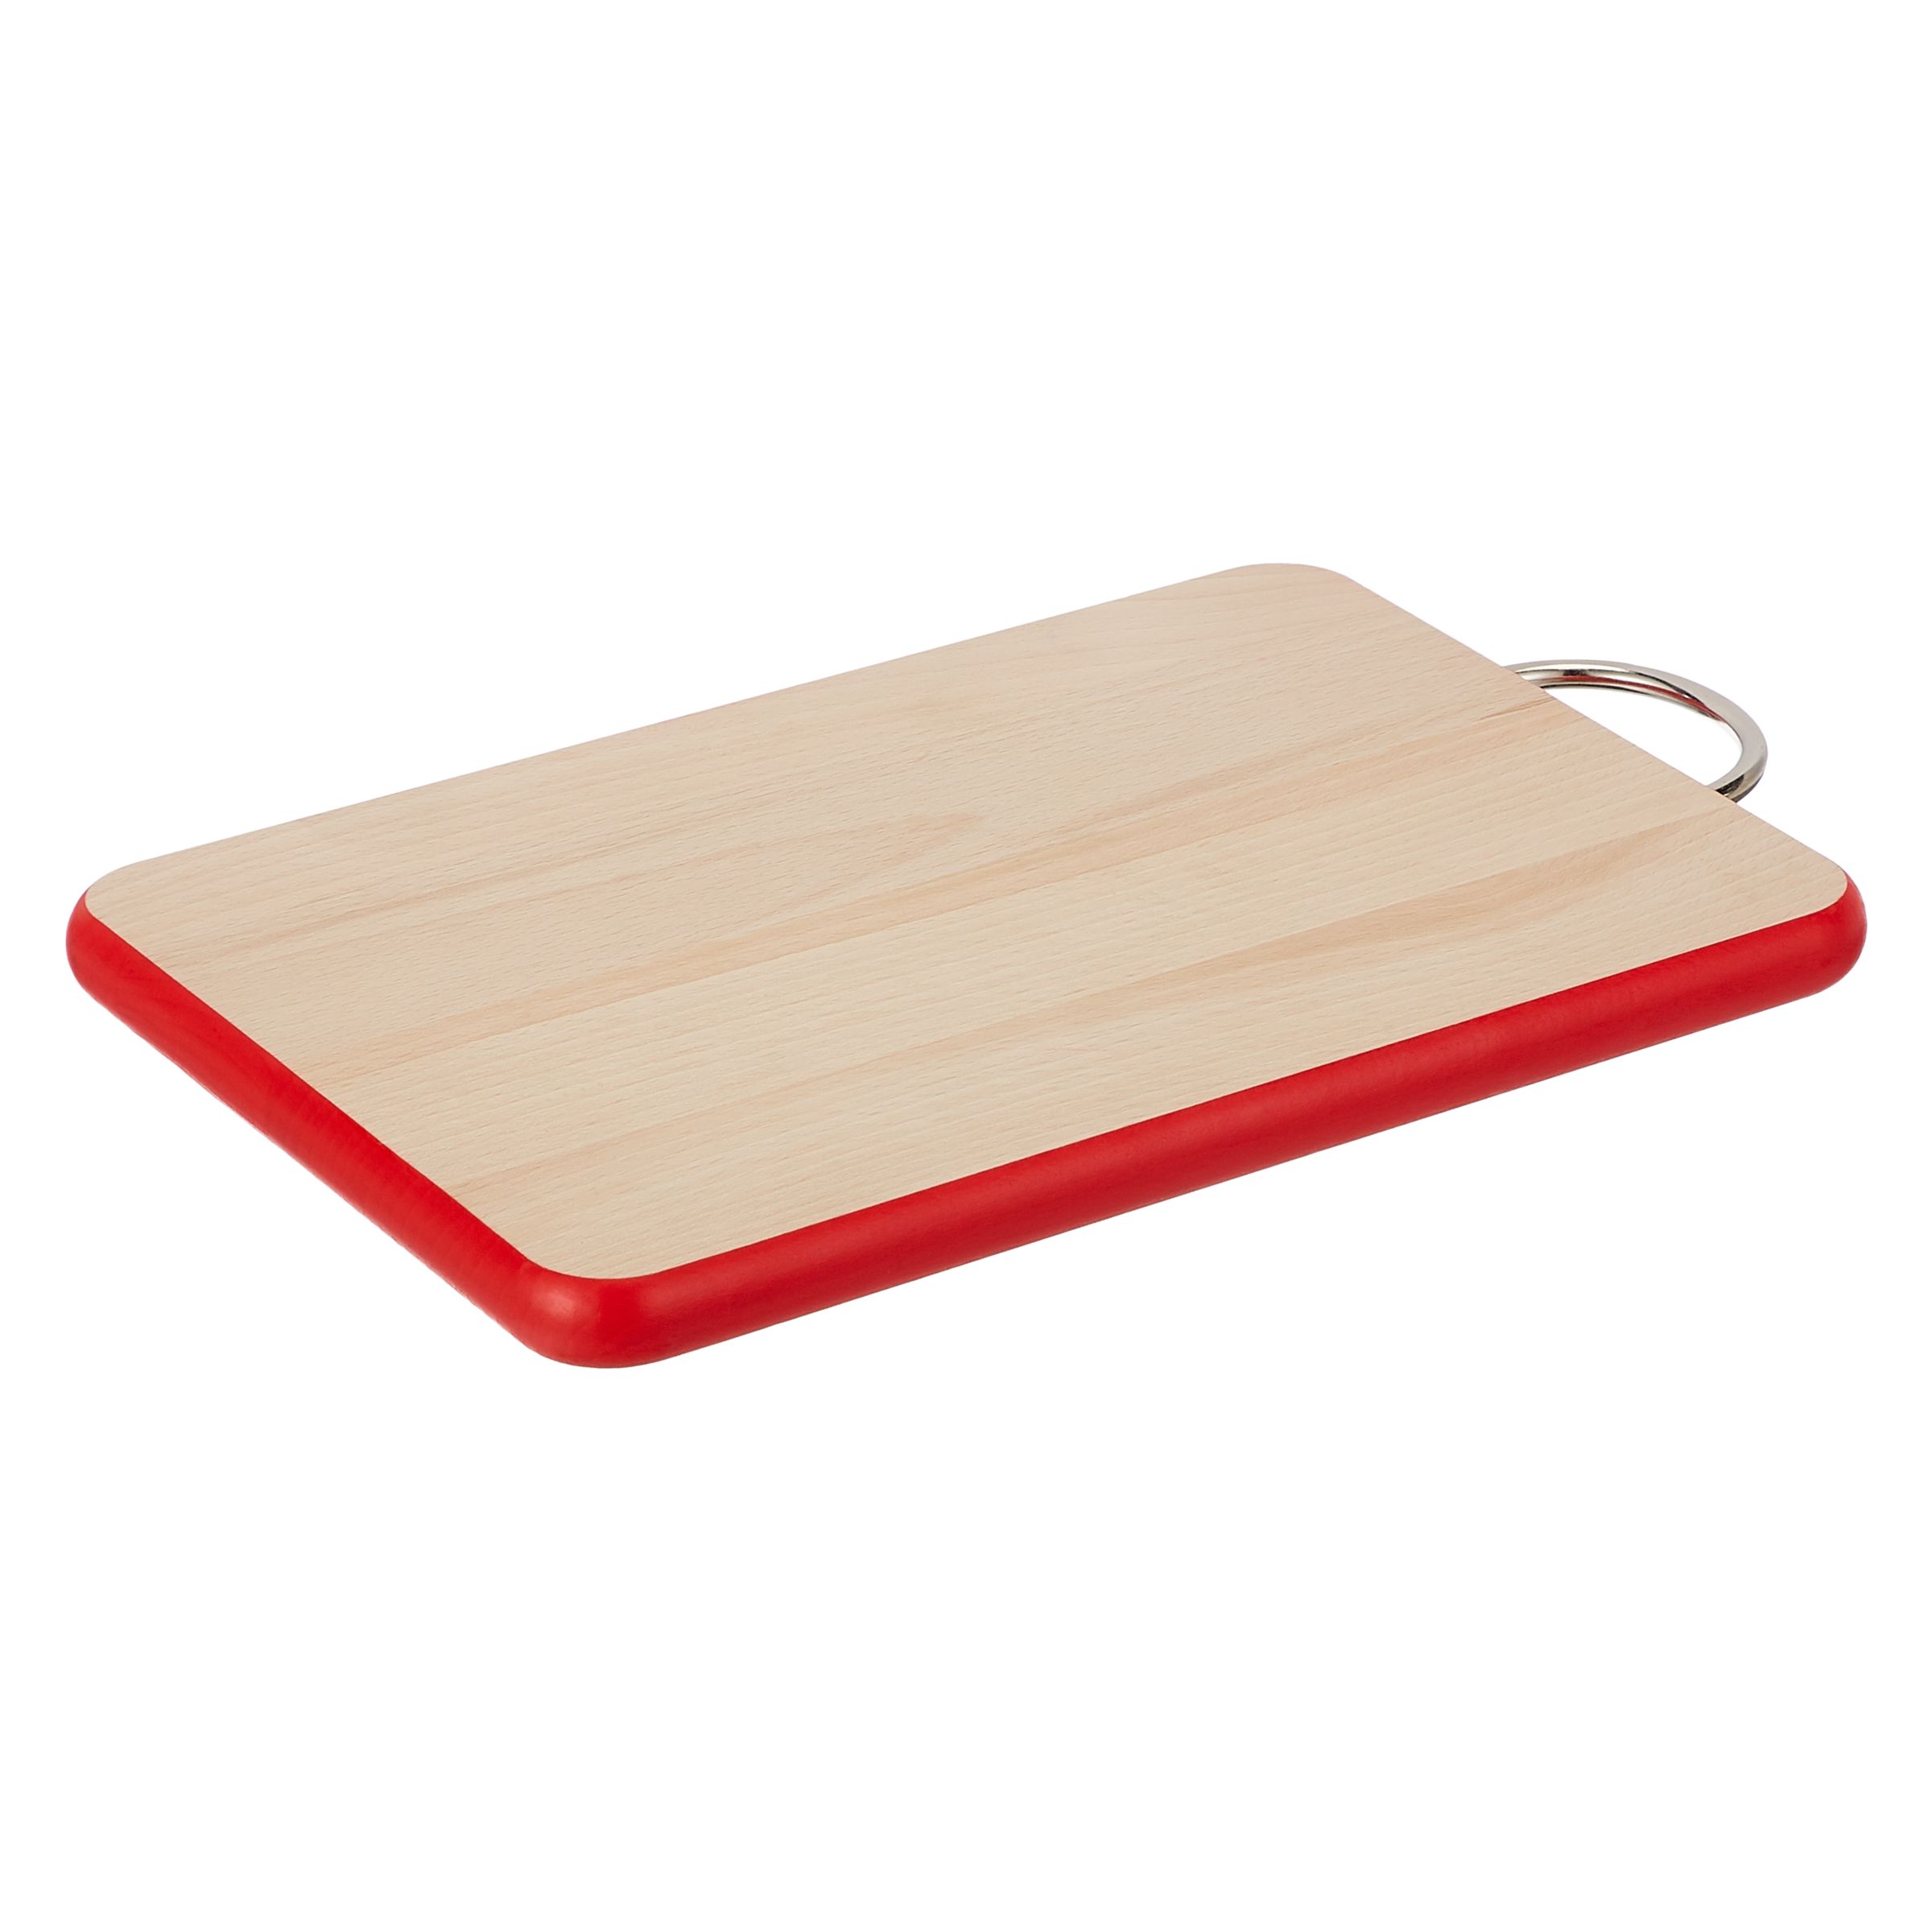 BuyJohn Lewis & Partners Novelty Small Red Trim Chopping Board, L23cm, FSC-Certified (Beech Wood) Online at johnlewis.com